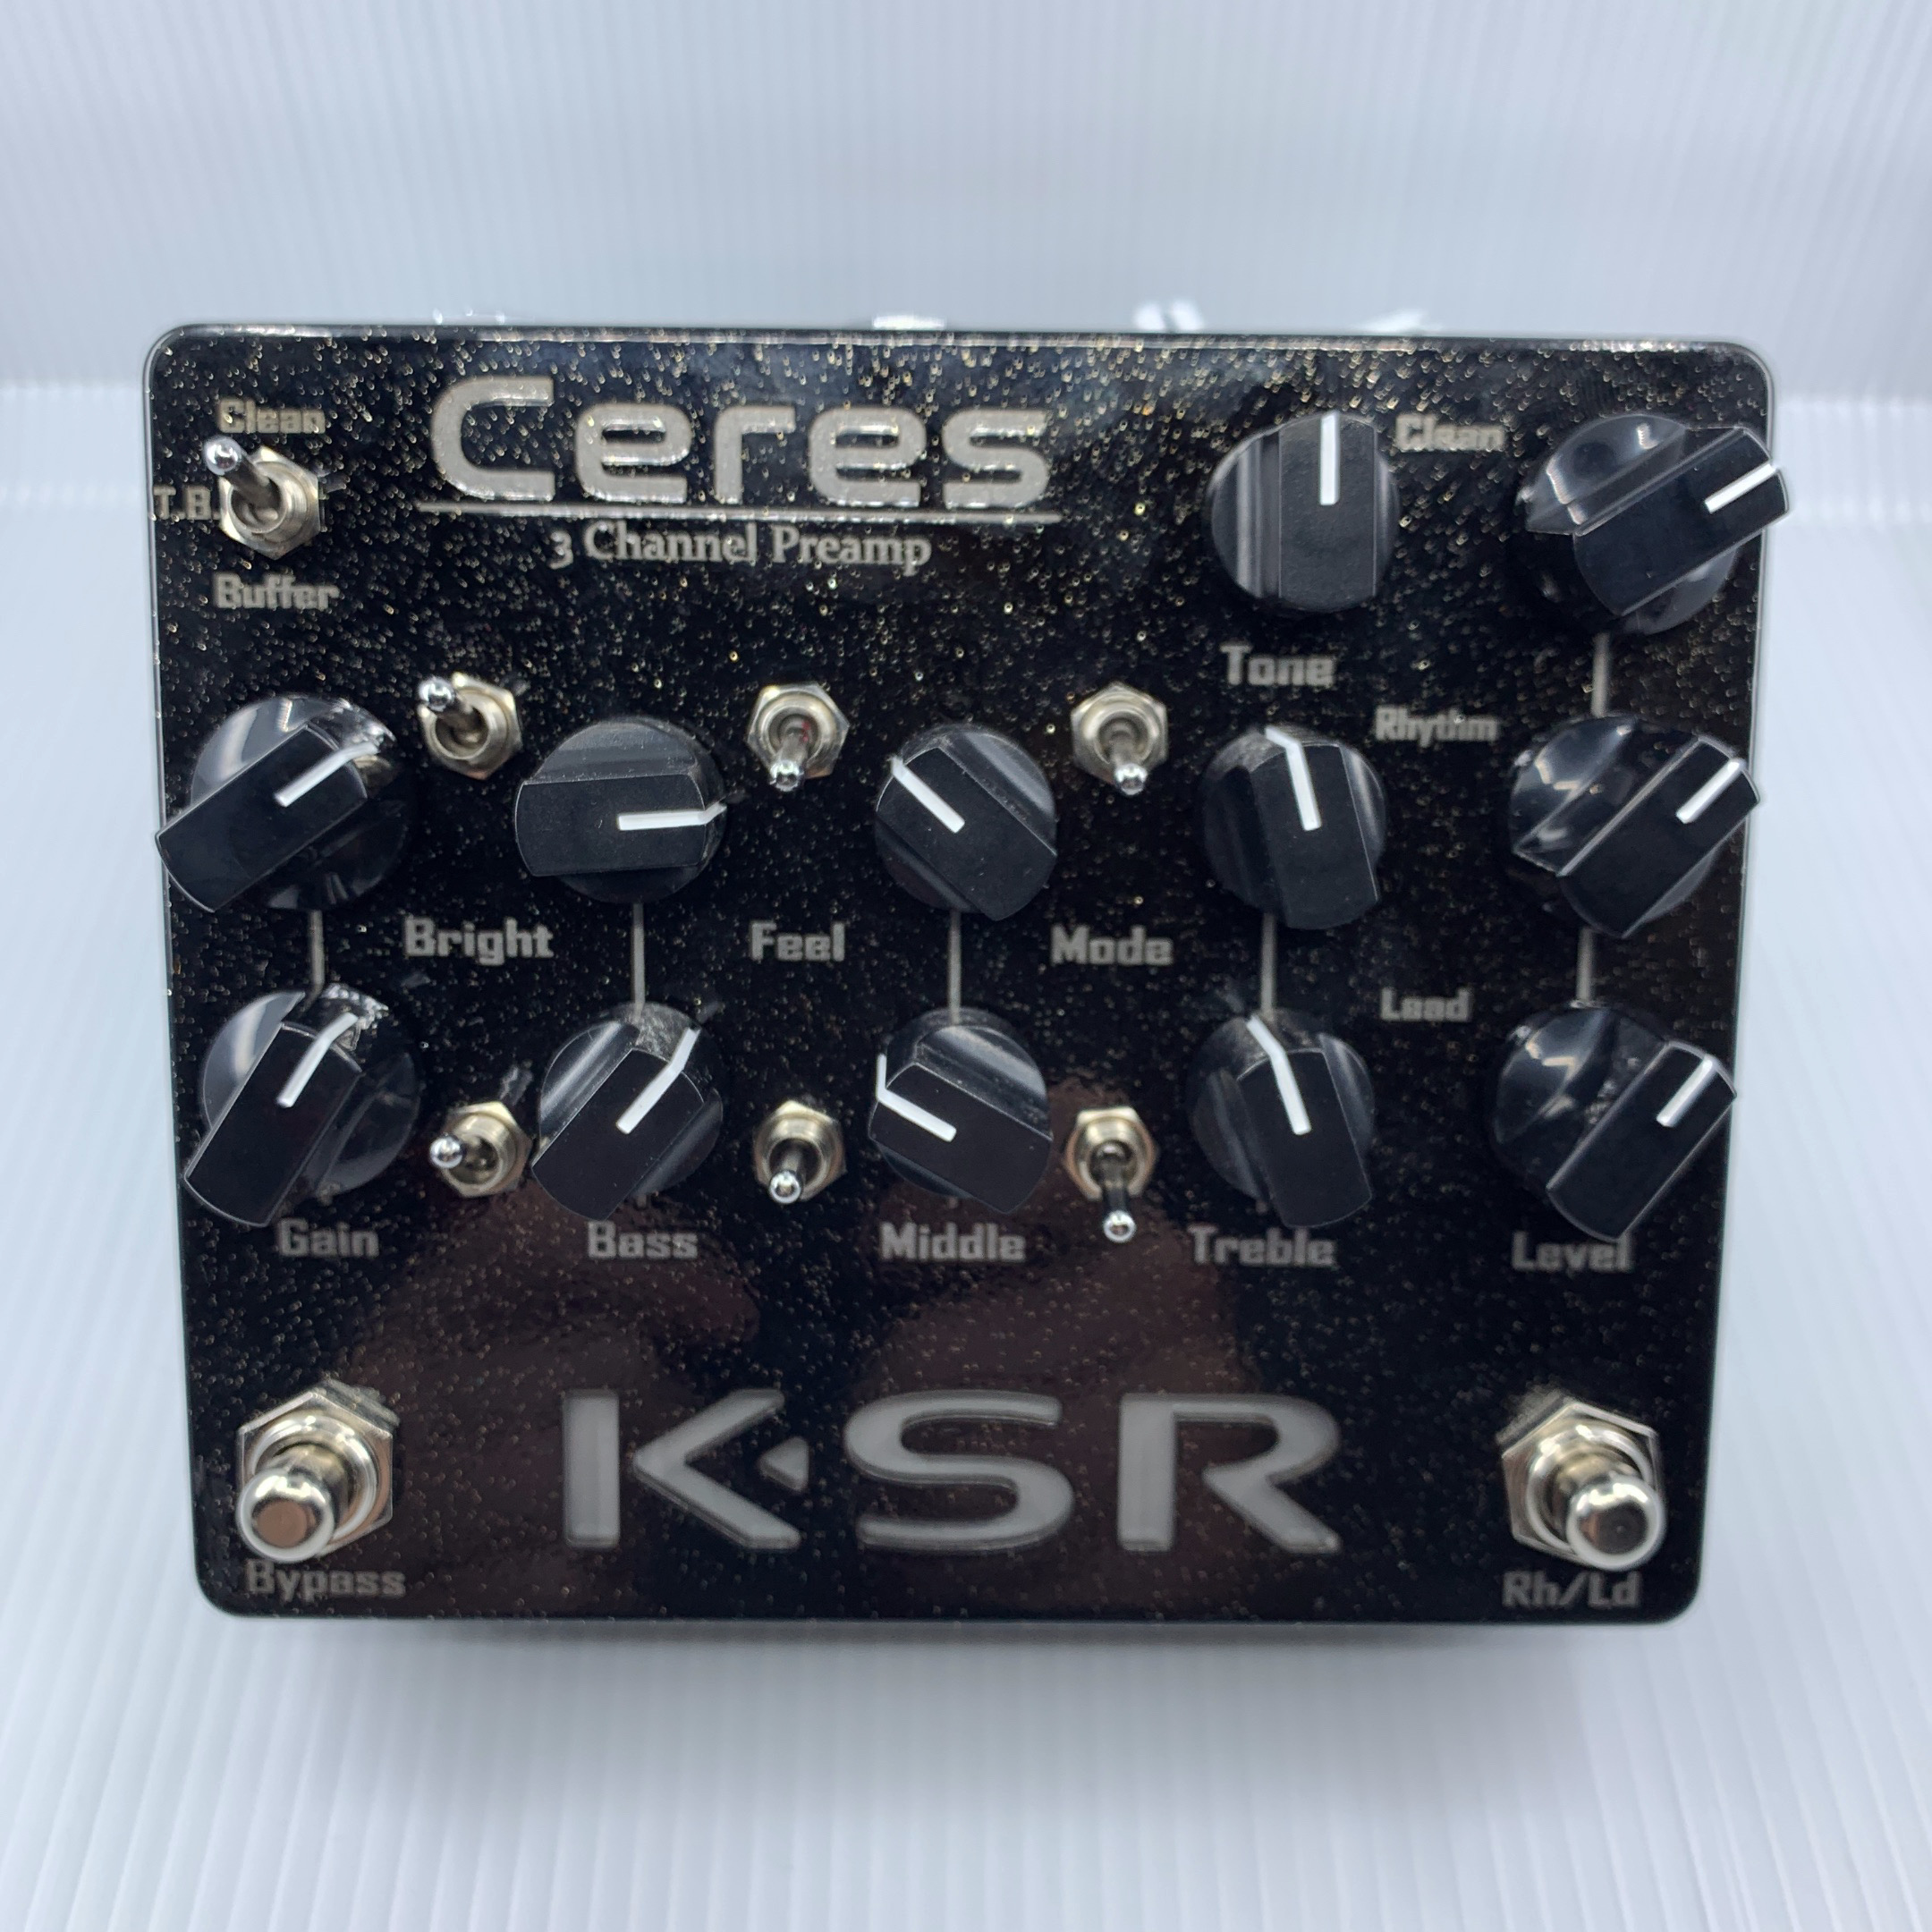 Ceres - 3ch Preamp Pedal